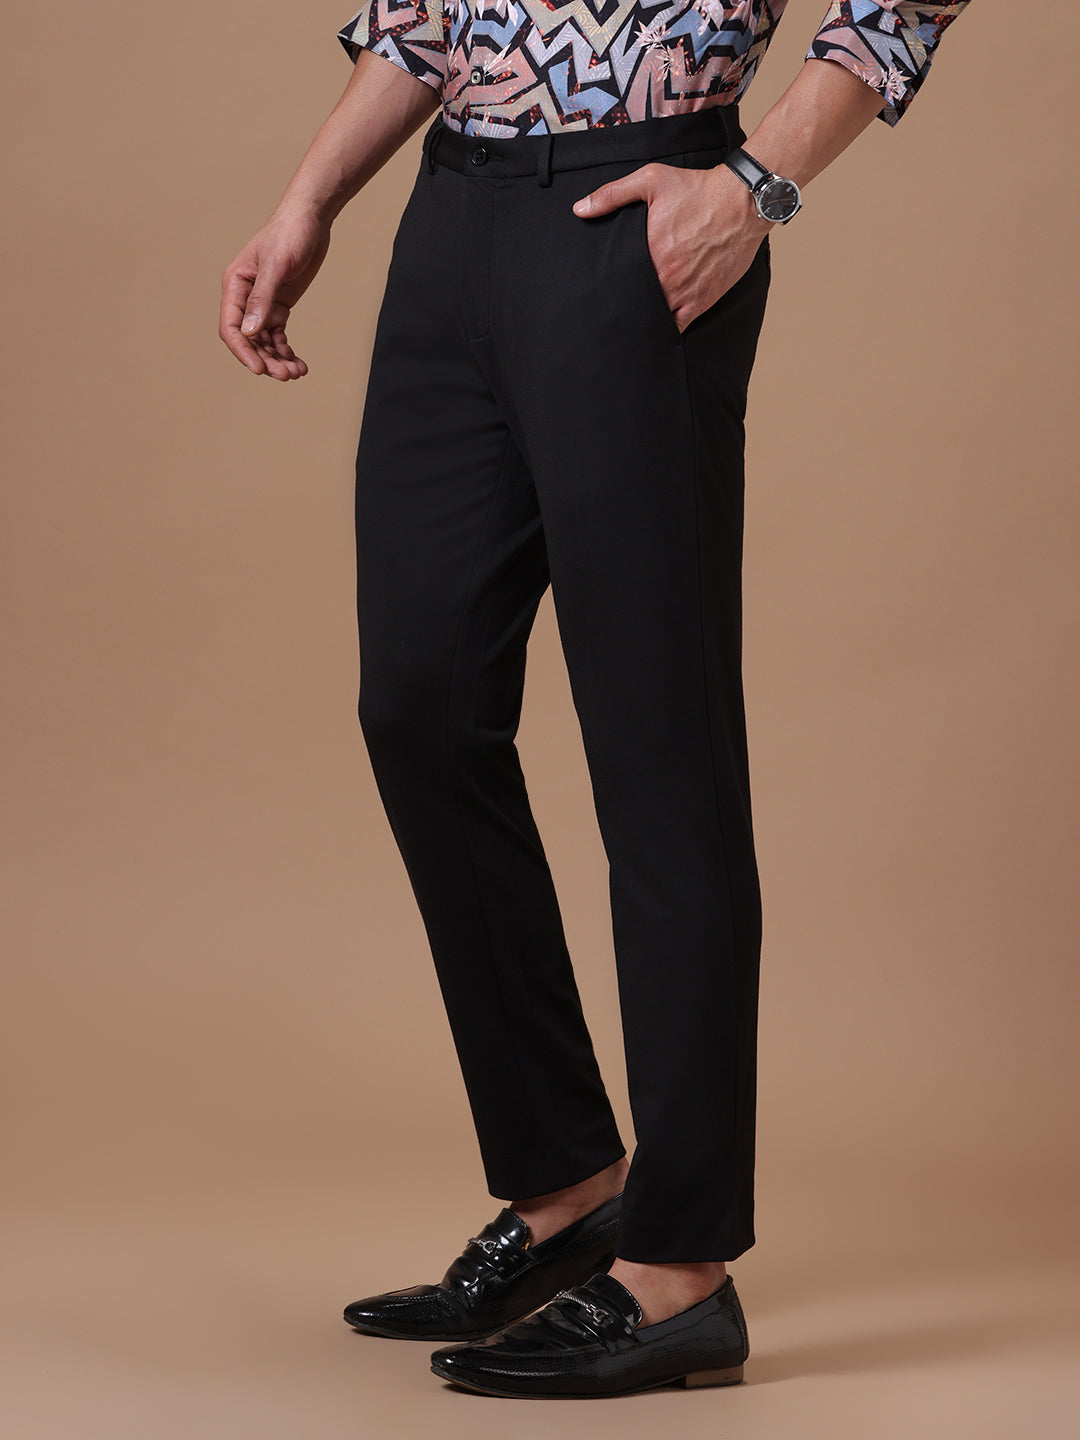 Knitted Slim Fit Black Formal Stretch Trouser (TAHLIA)